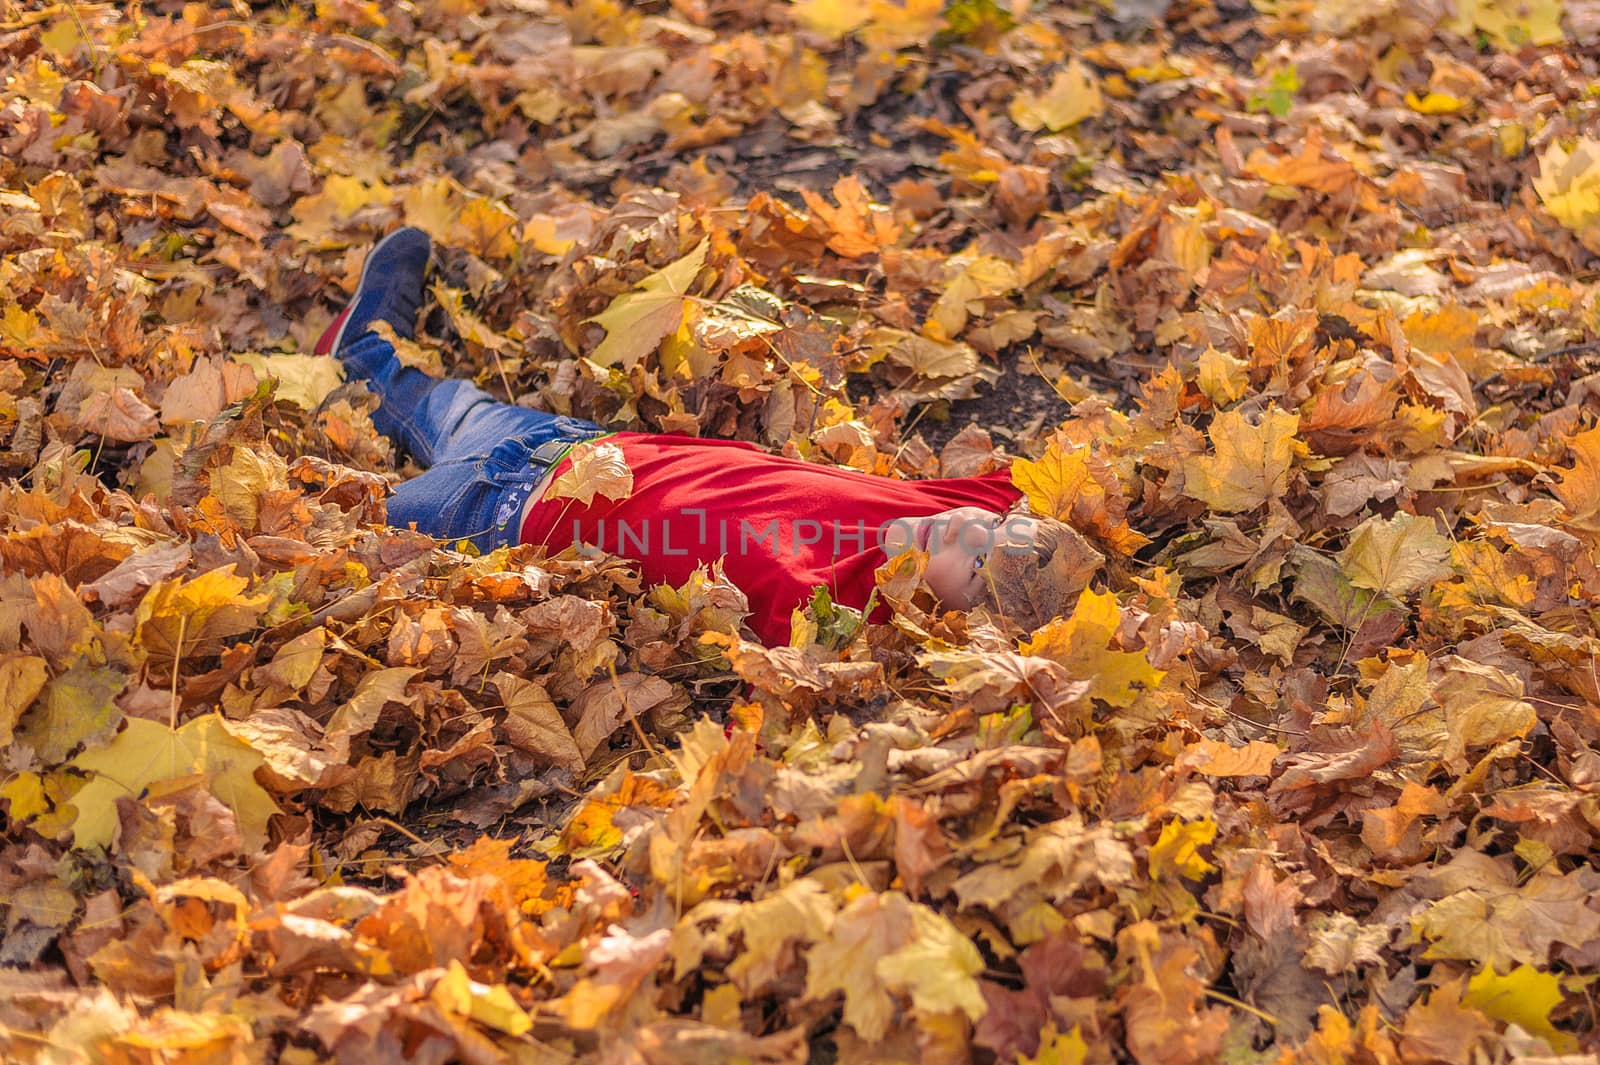 cheerful boy in a red jacket and blue jeans looks up to the sky, lying in yellow leaves in the autumn forest